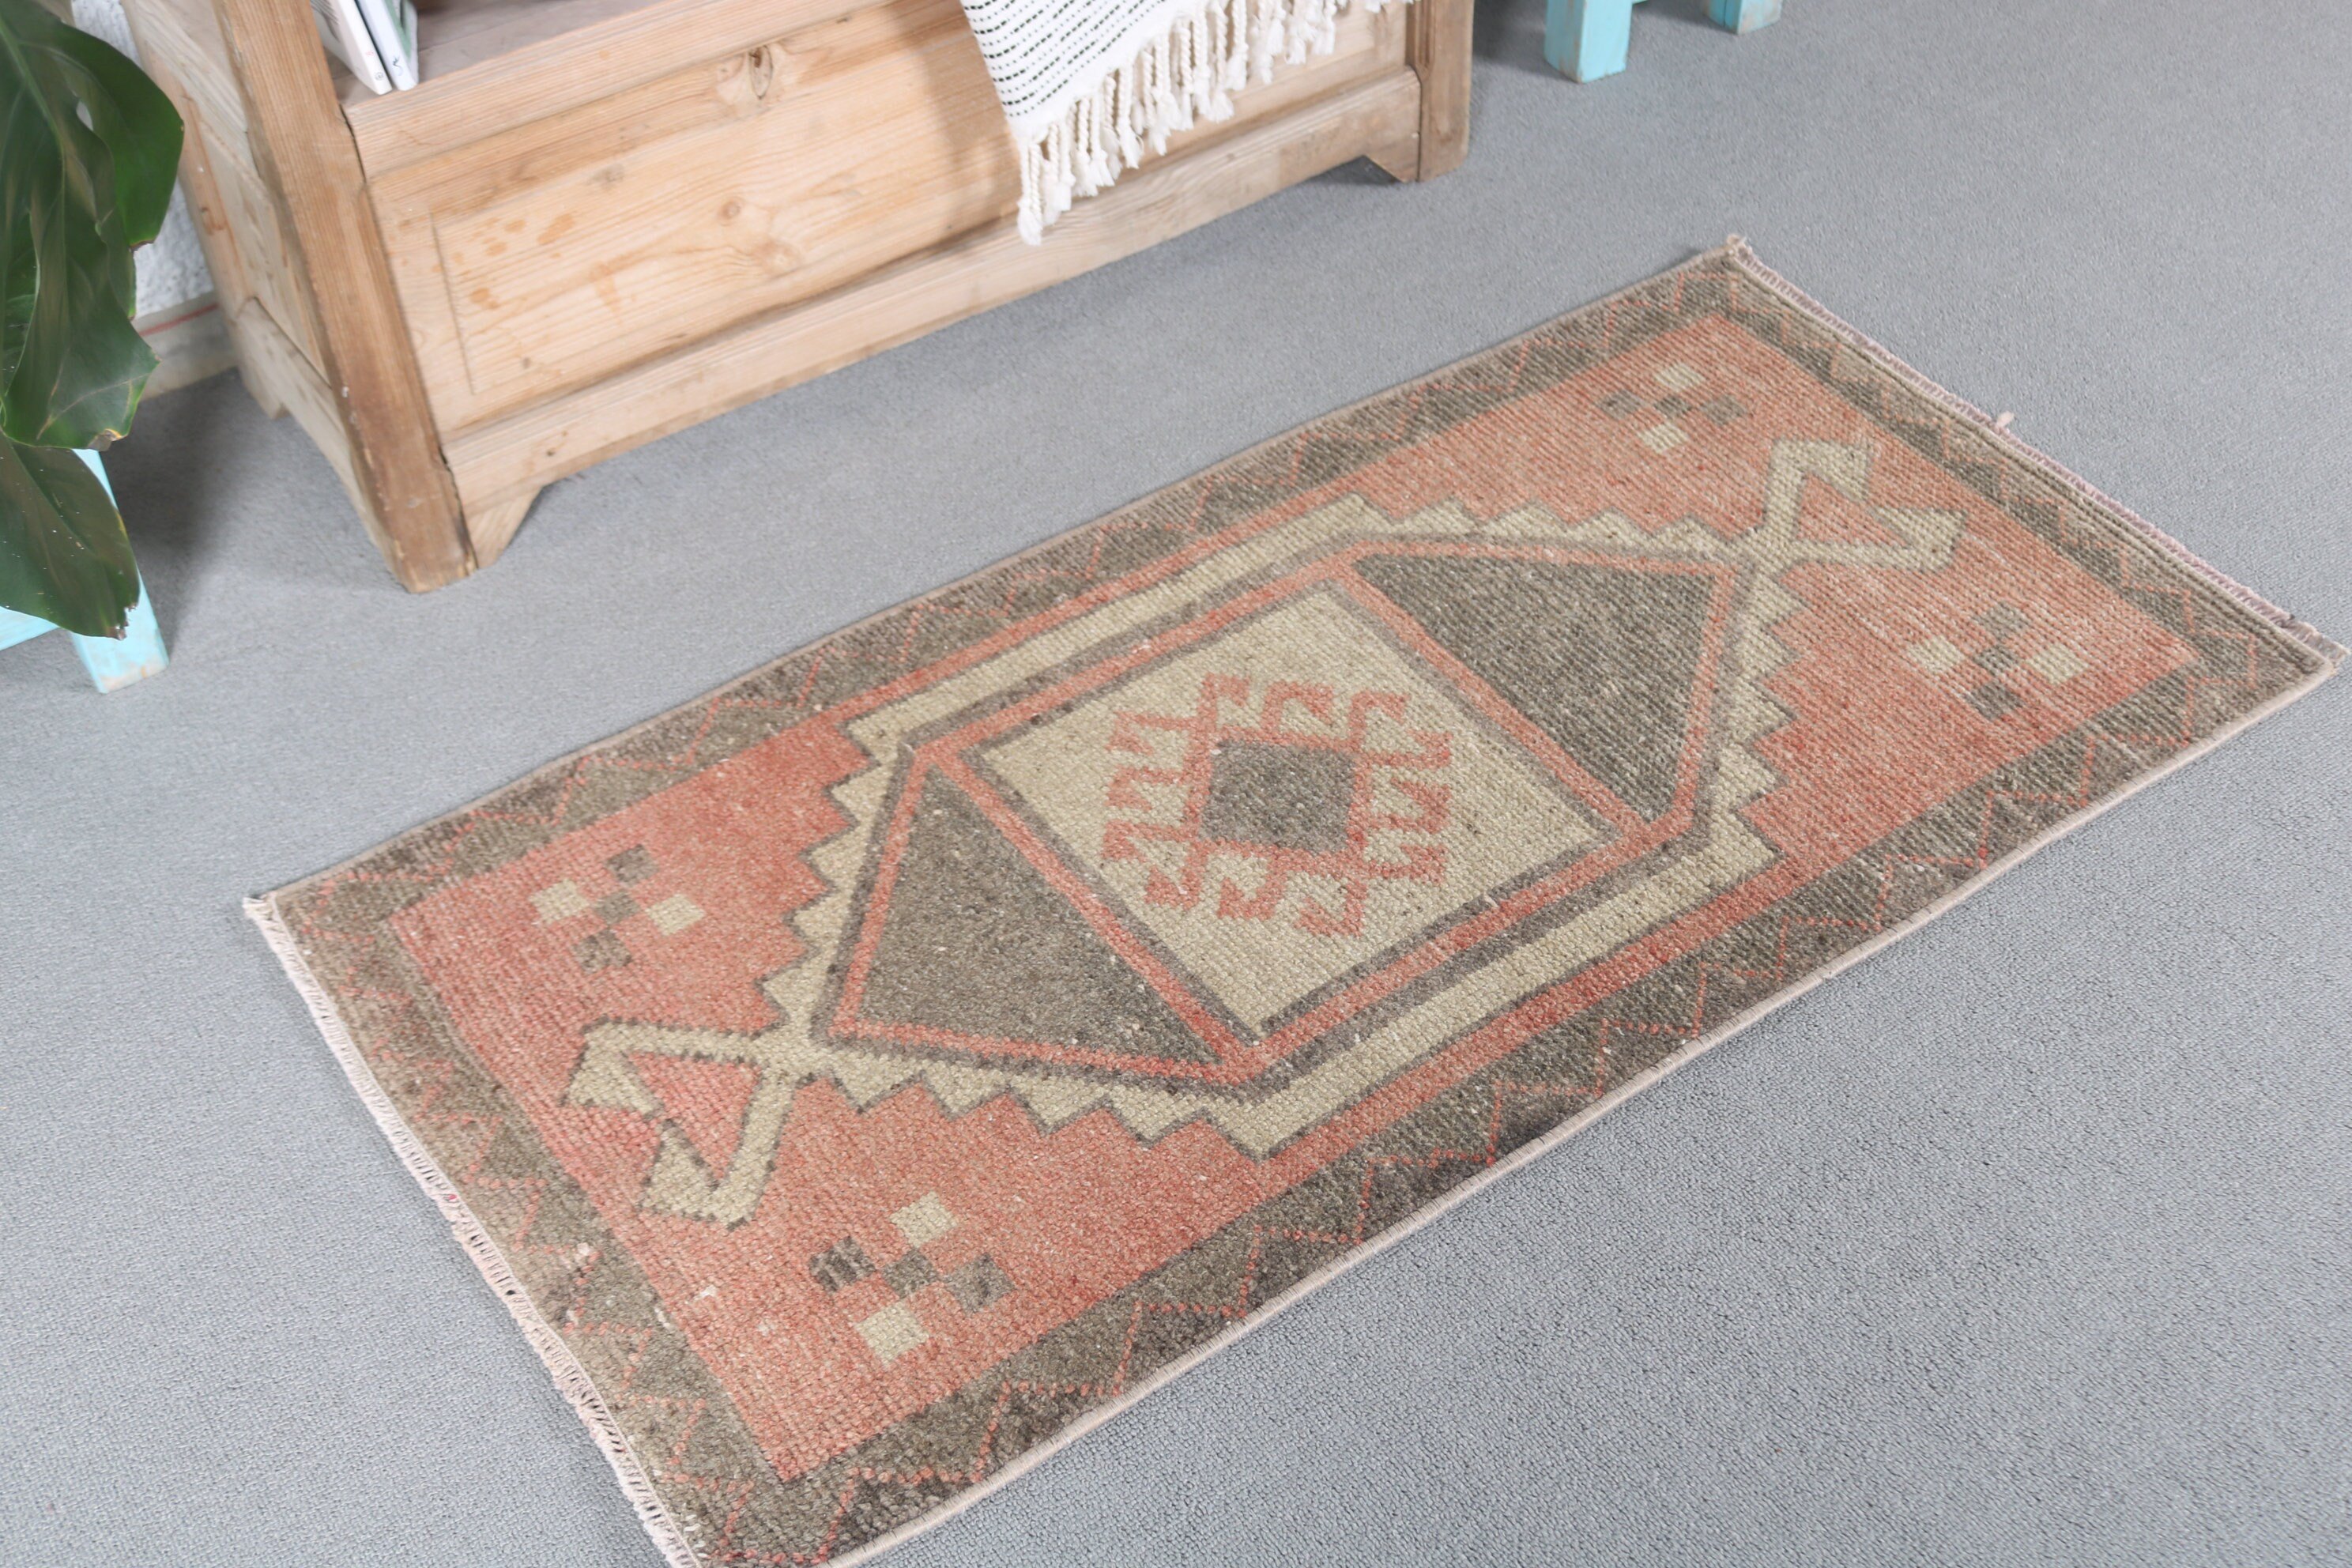 Bathroom Rug, Turkish Rug, Entry Rug, Moroccan Rug, Vintage Rugs, Rugs for Car Mat, Brown Oushak Rugs, 1.7x3.4 ft Small Rugs